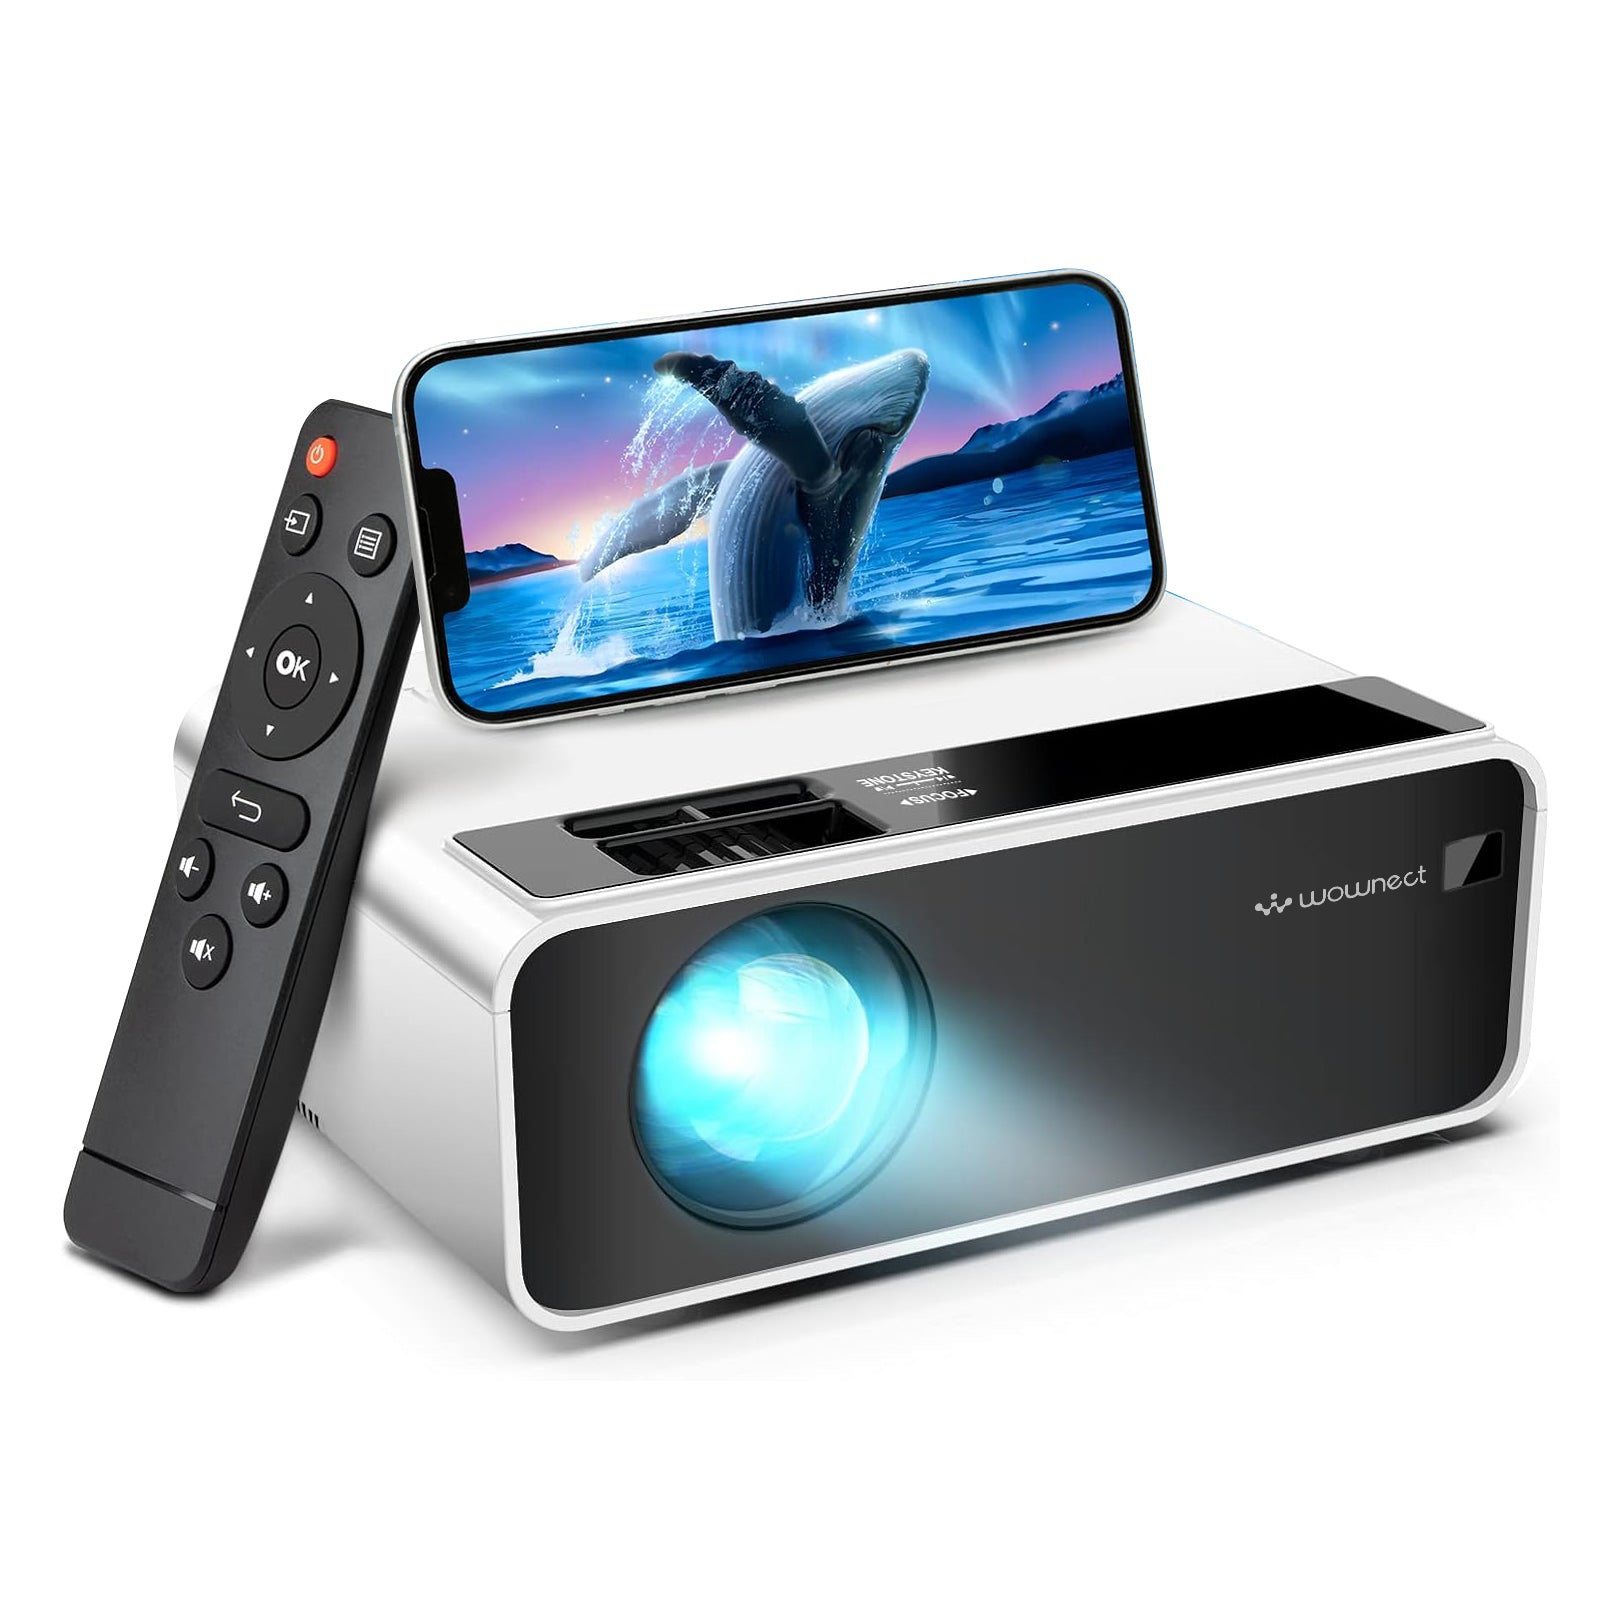 Mini Wifi Projector |150 ANSI/Screen Size upto 120inch| Native Res 800x480P| Wireless Screen Mirroring|Included 100inch Projector Screen